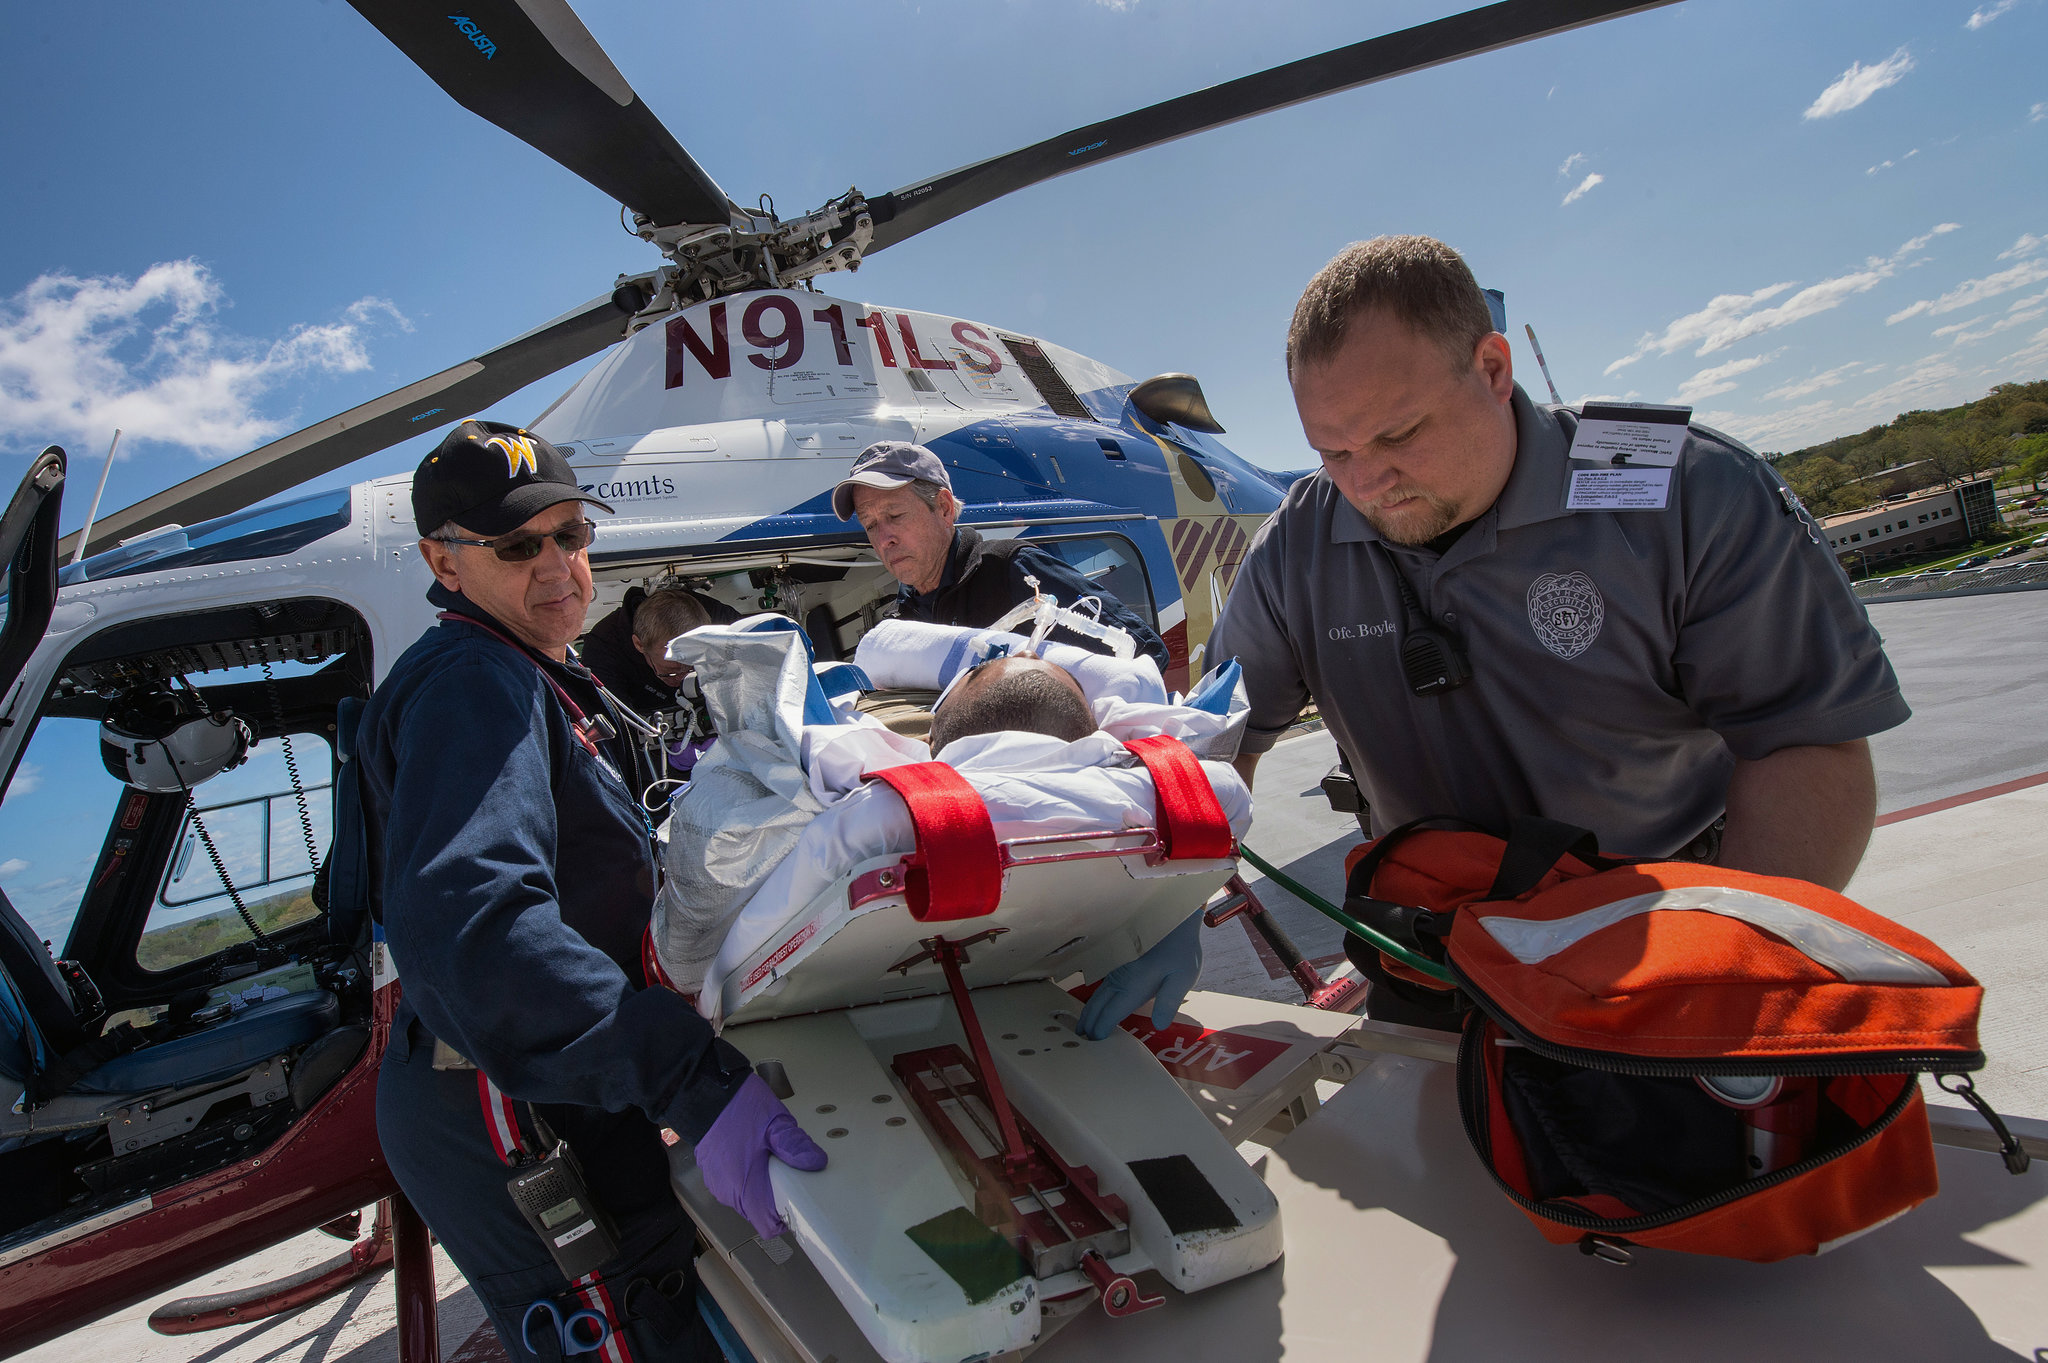 Air Ambulance: The Vital Role of Air Ambulances in Emergency Medical Care, Functions and Capabilities, medical emergencies